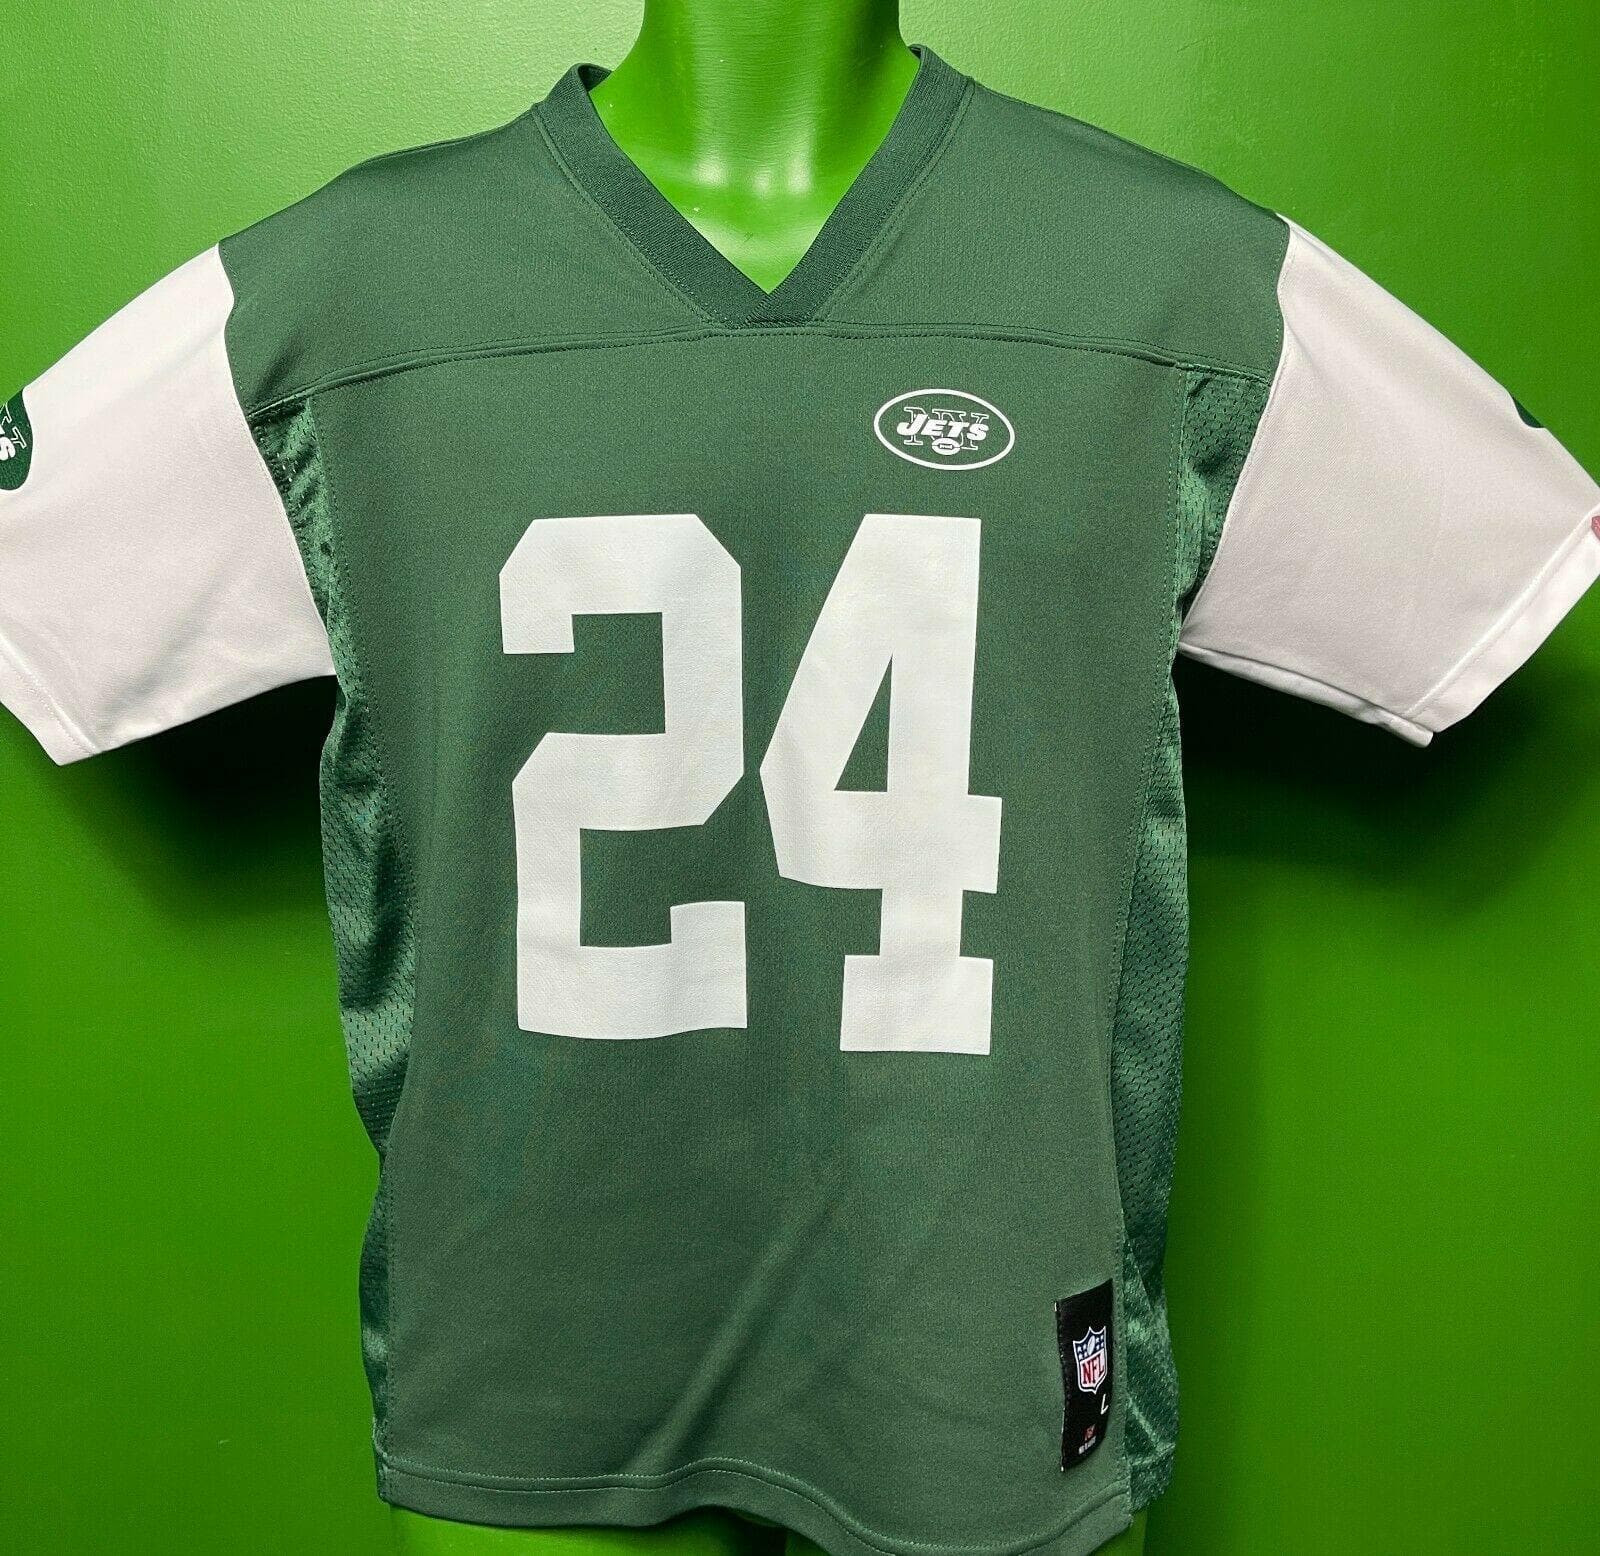 NFL New York Jets Darrelle Revis #24 Jersey Youth Large 14-16